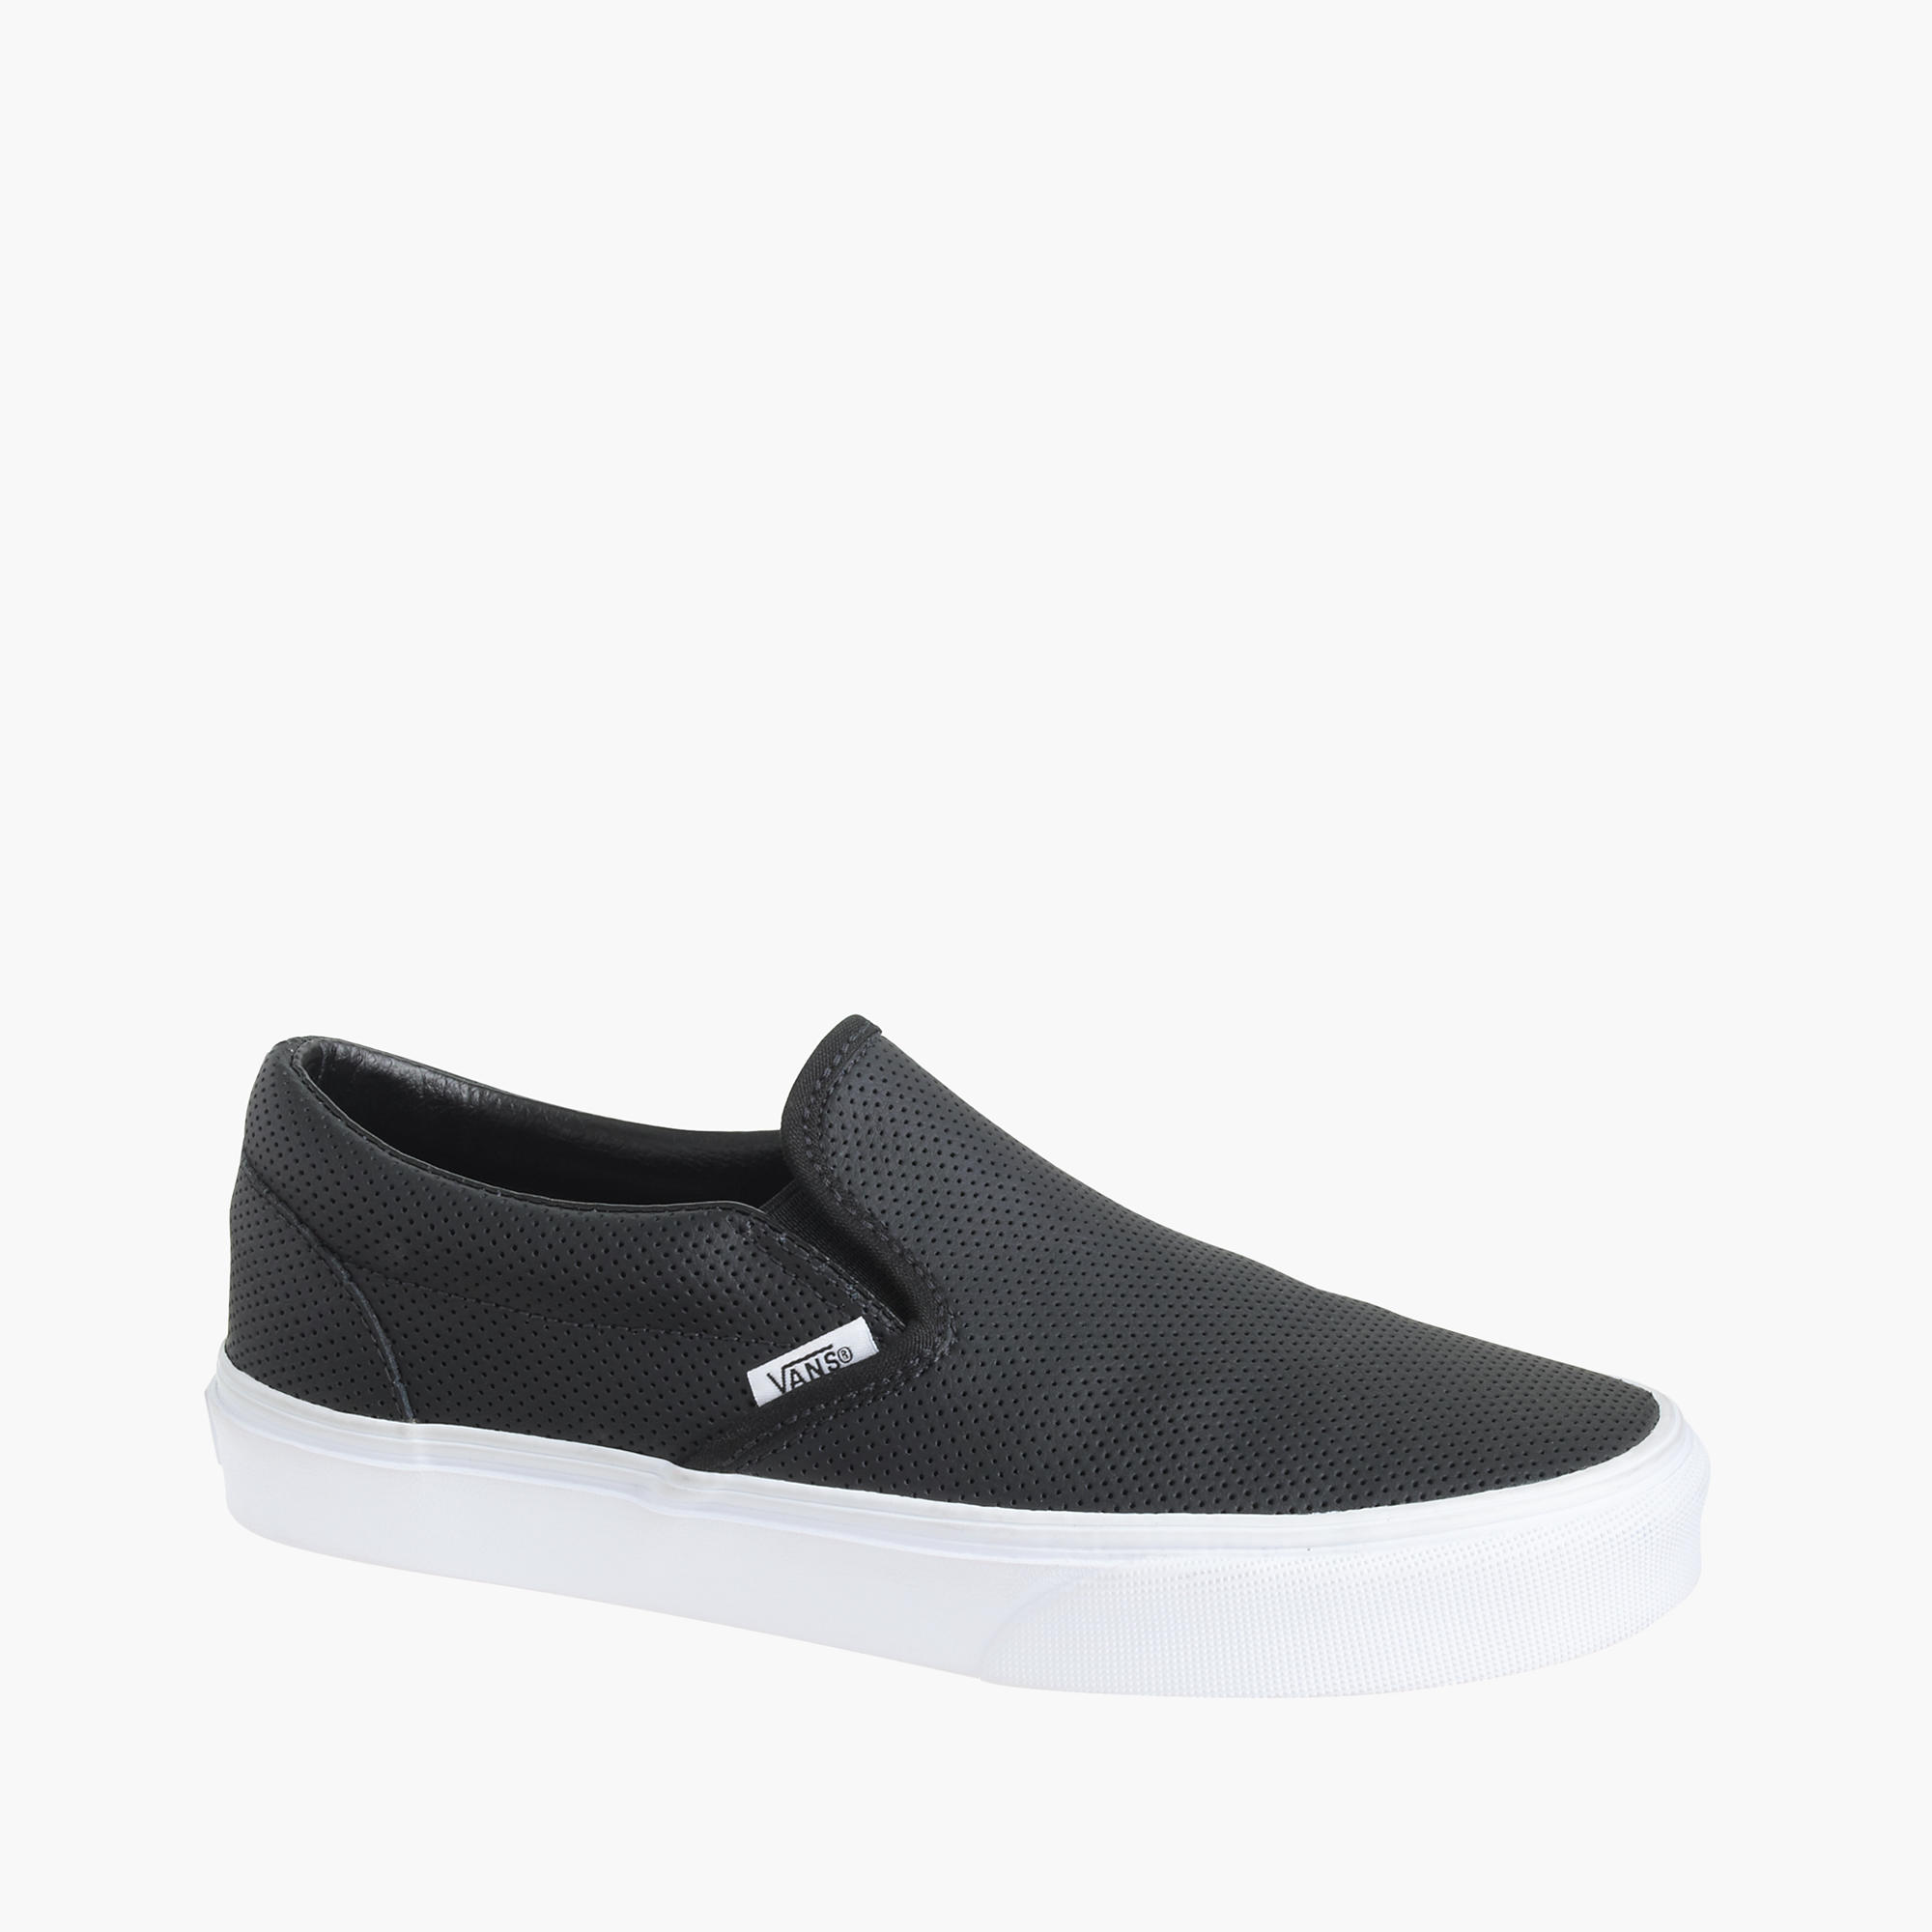 Vans® classic slip-on sneakers in perforated leather : | J.Crew